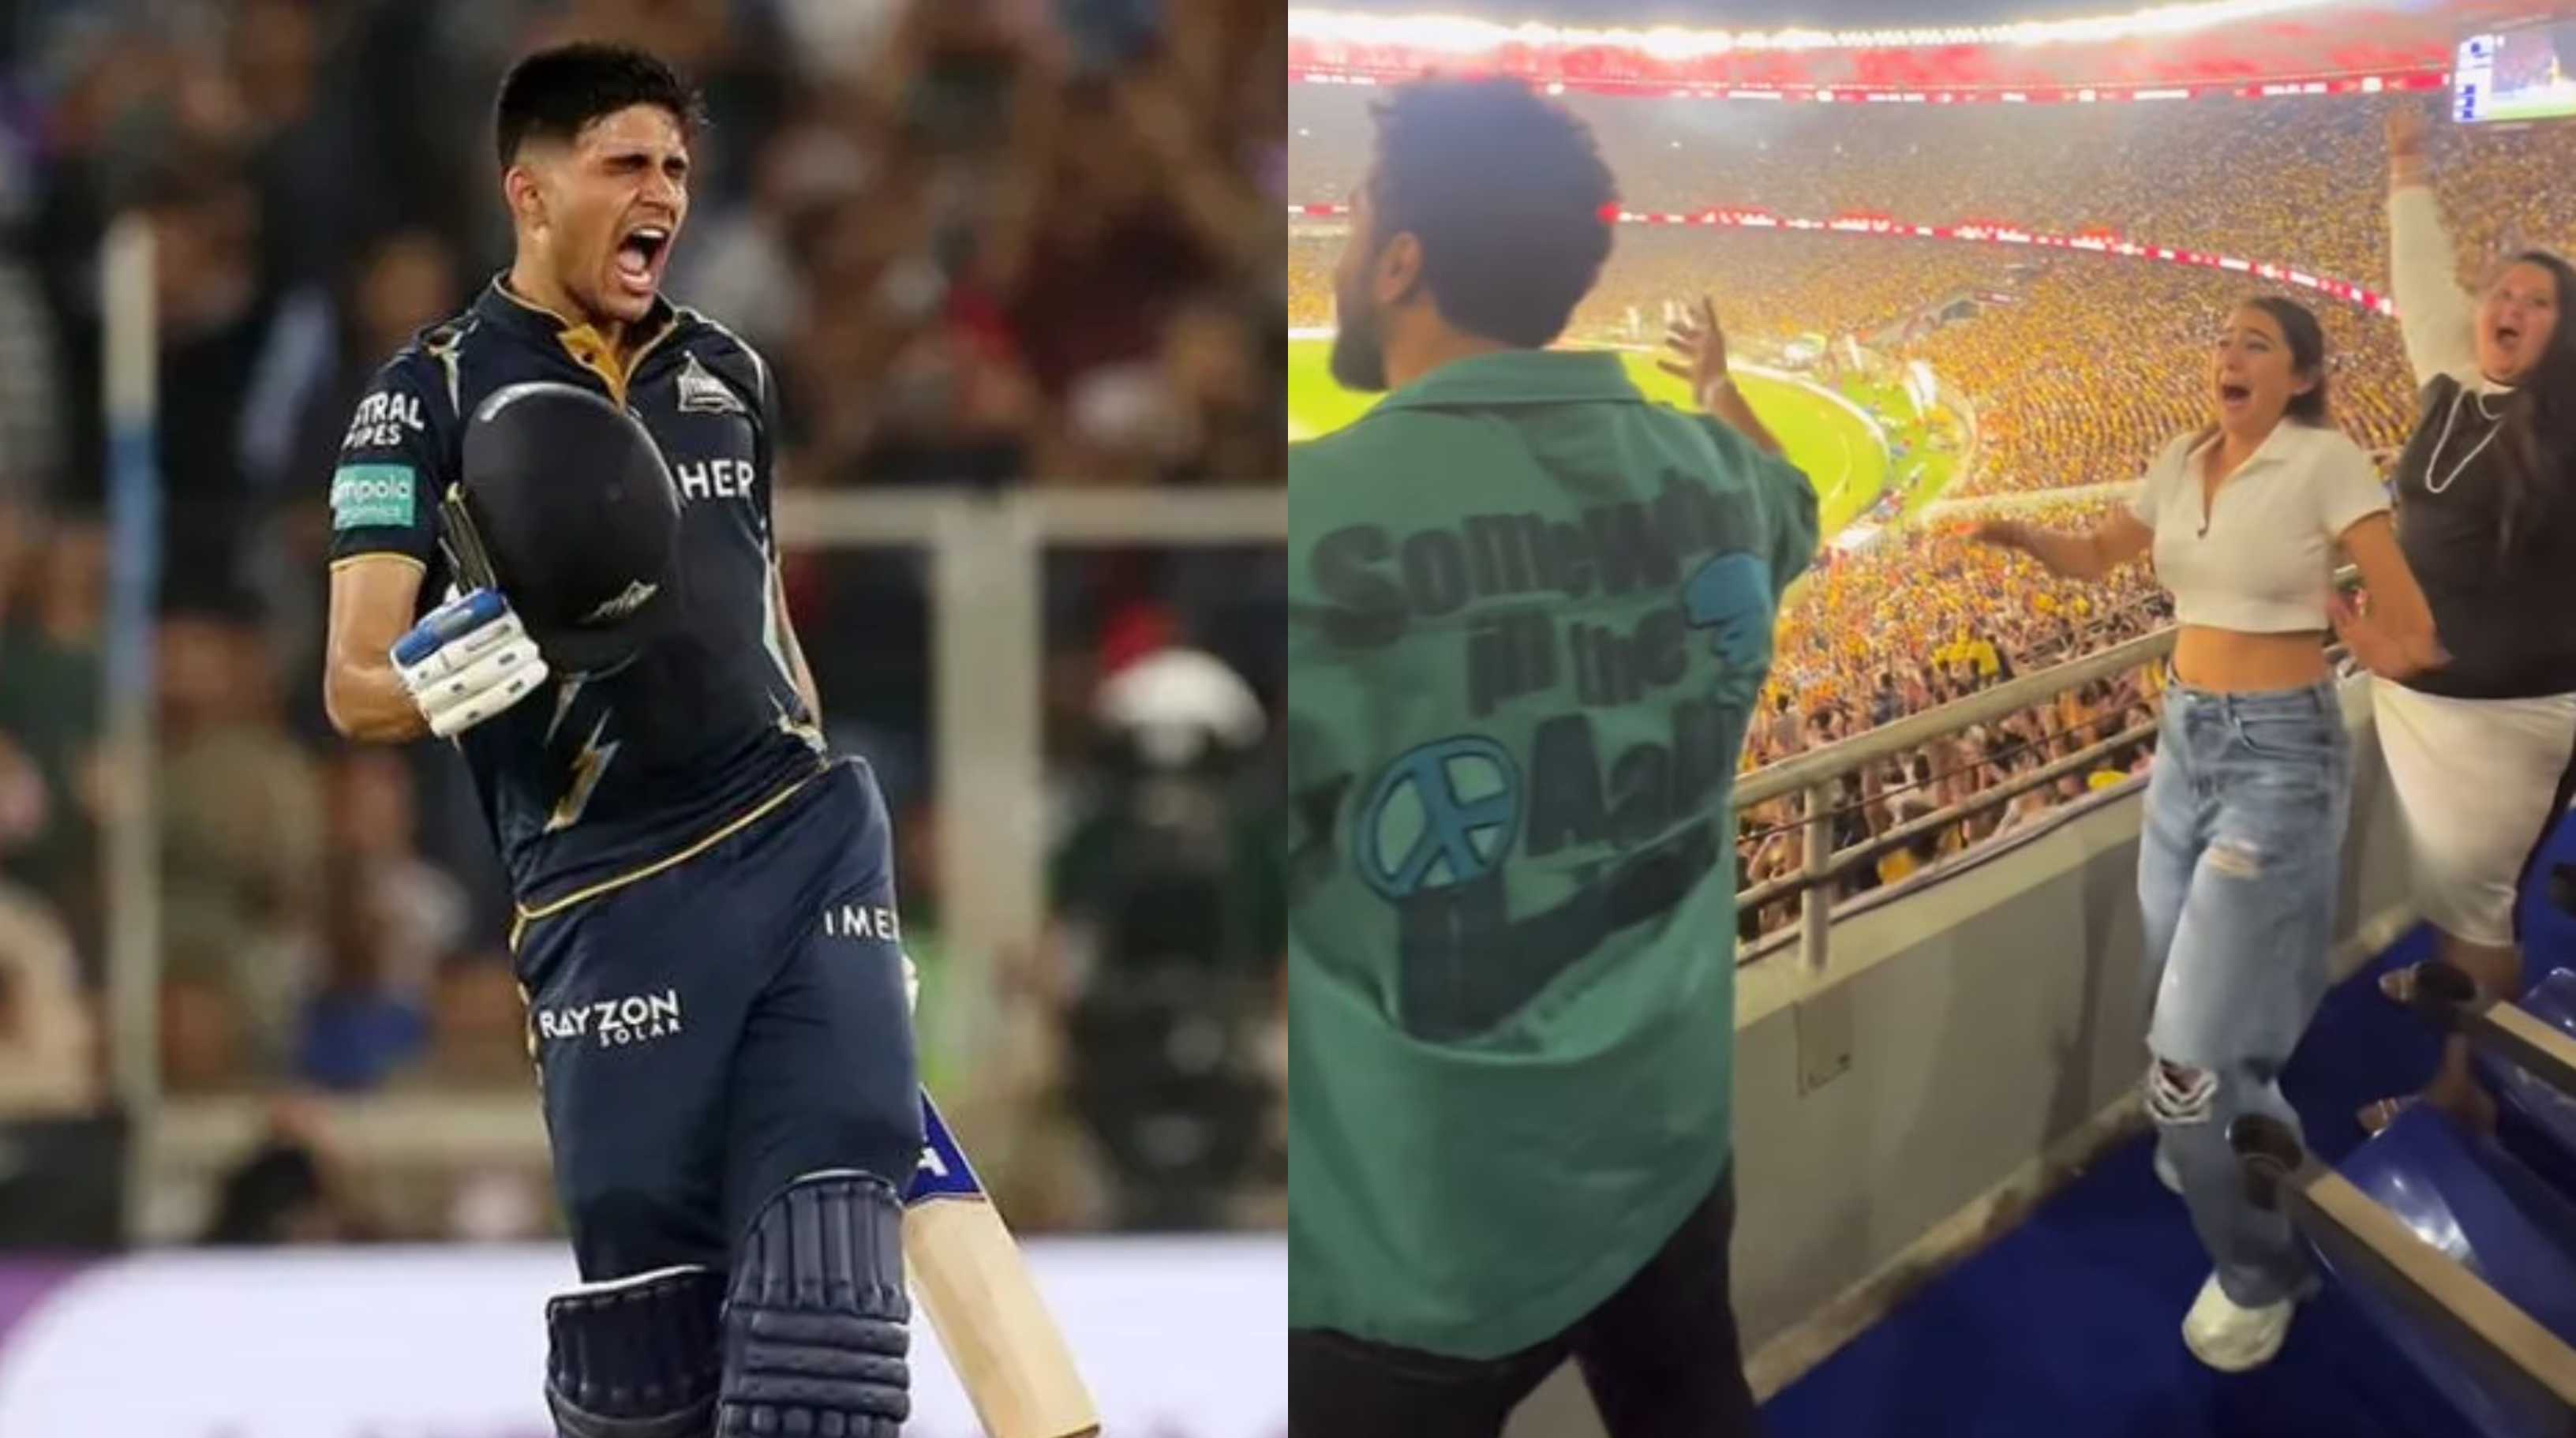 ‘That toxic ex’: Sara Ali Khan gets trolled for celebrating after Shubman Gill’s team loses to CSK in IPL 2023 final